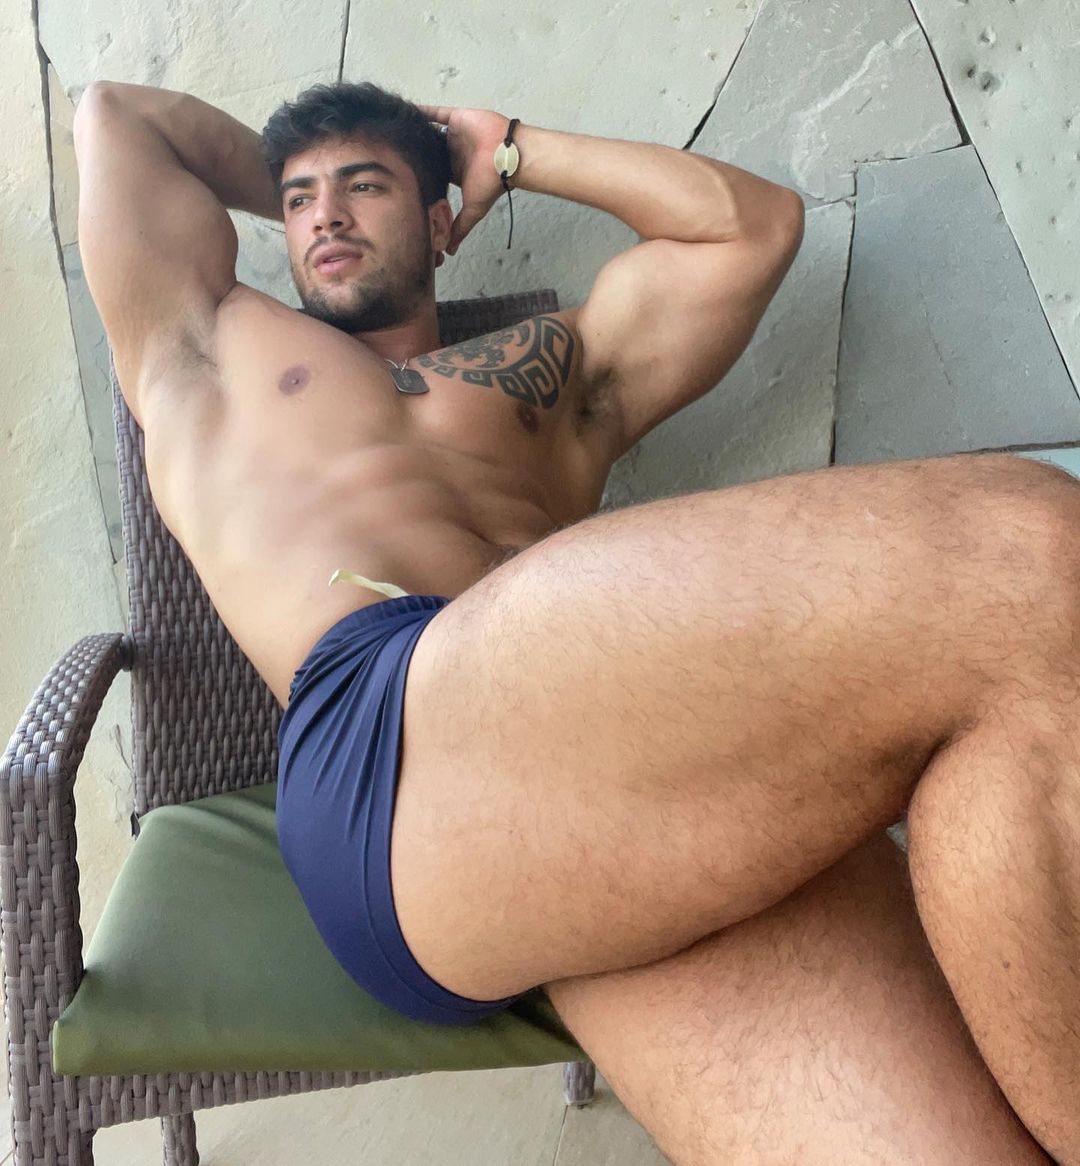 Come inside and discover the wild side of daniel montoyas onlyfans